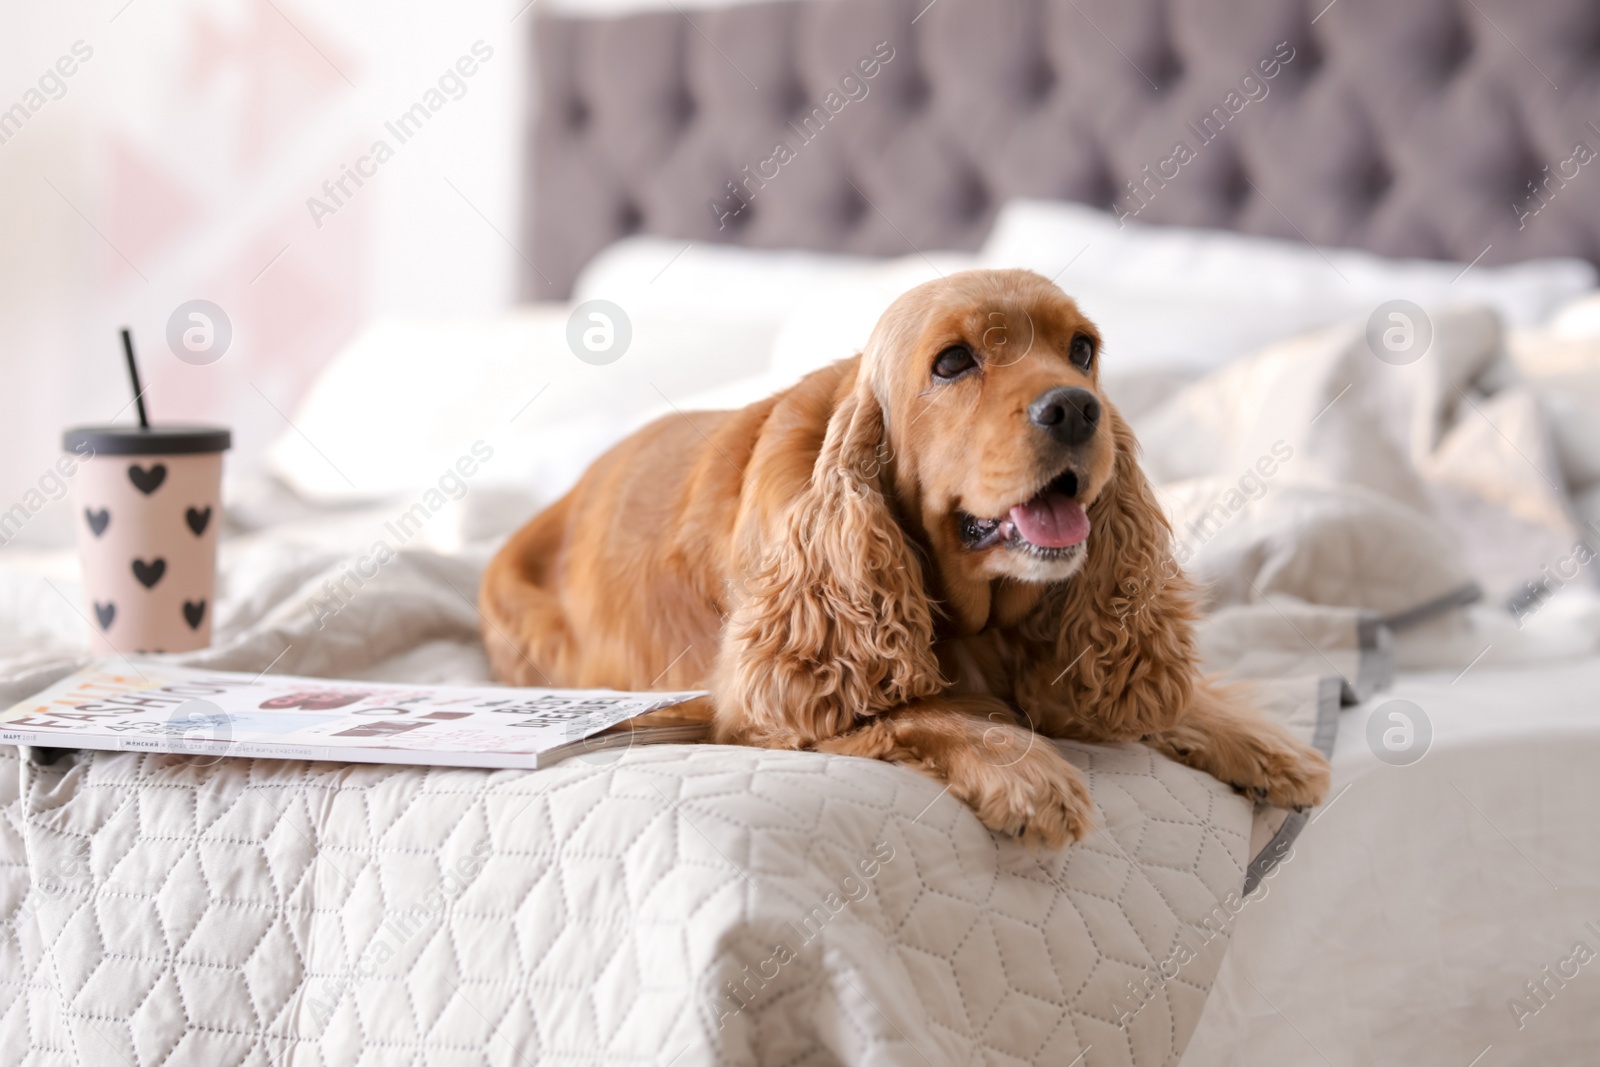 Photo of Cute Cocker Spaniel dog on bed at home. Warm and cozy winter